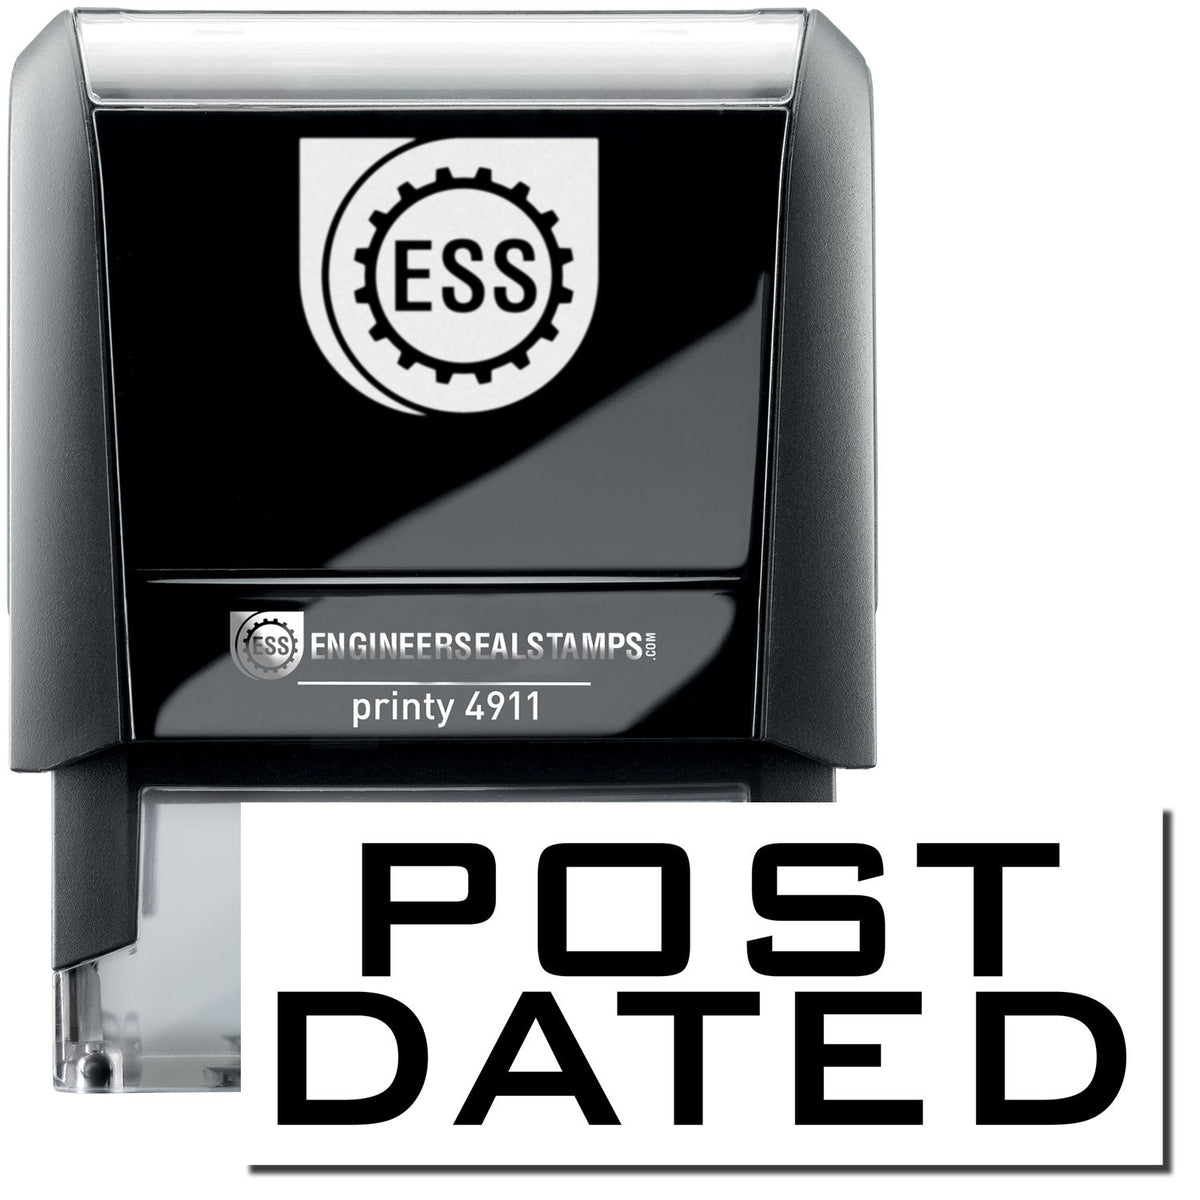 A self-inking stamp with a stamped image showing how the text &quot;POST DATED&quot; is displayed after stamping.